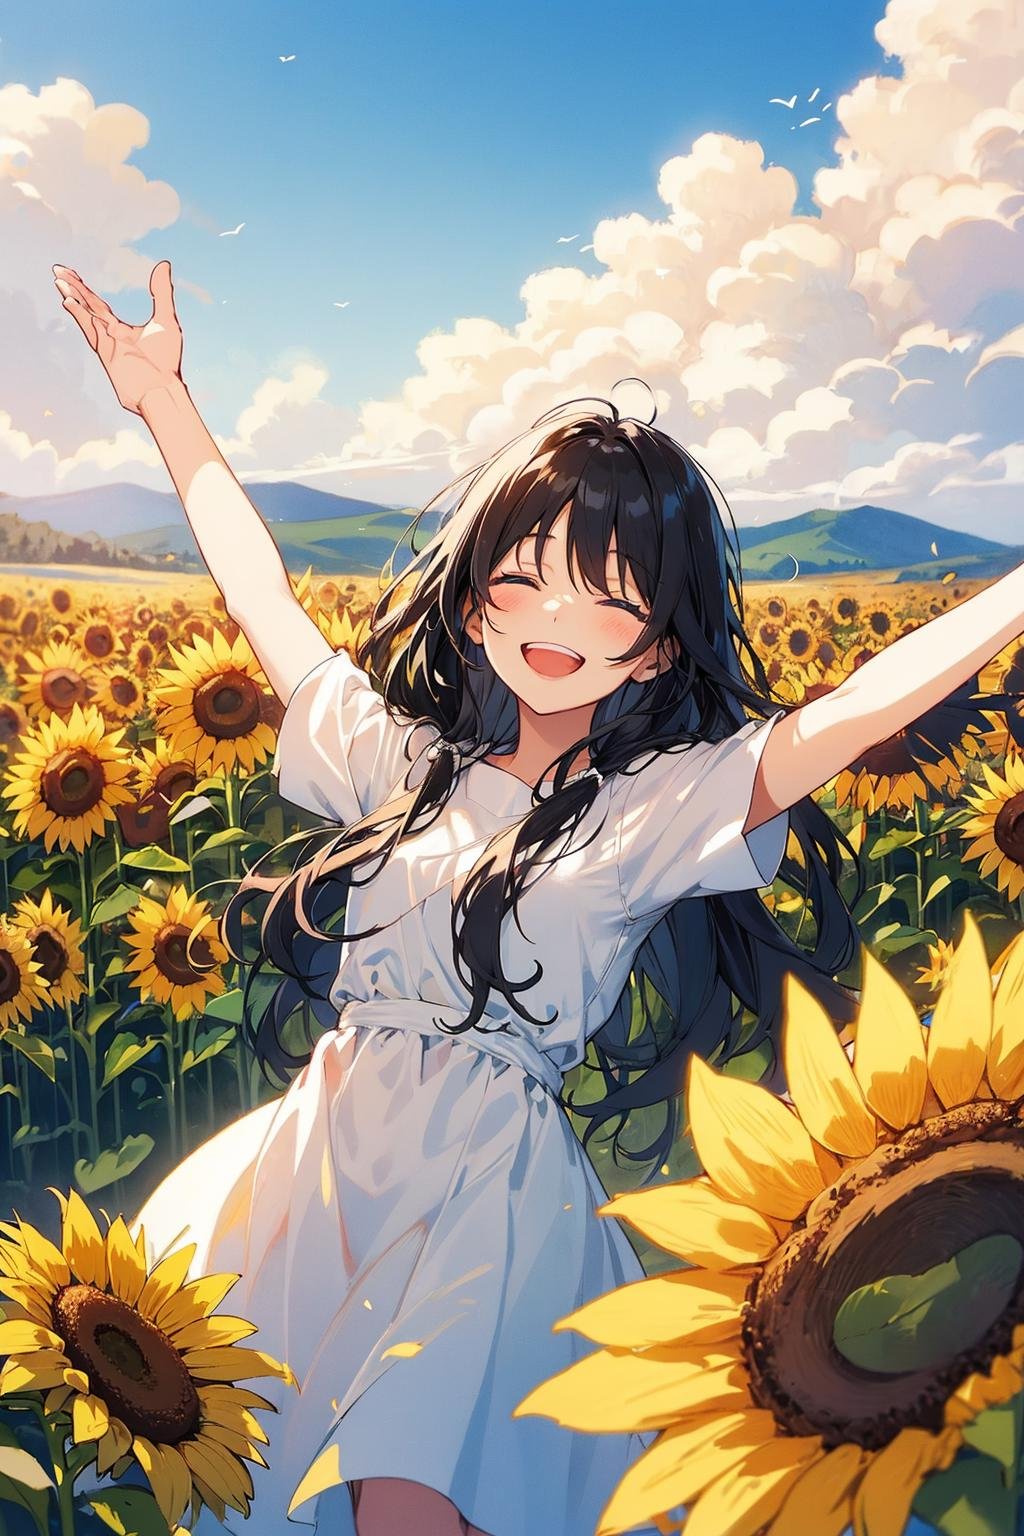 1girl with a very long hair, hair over eyes, black hair, blue eyes, closed eyes, laughing, smile, open arms, windmill, sunflower camp scenery, light colors, dappled sunlight, warm, 